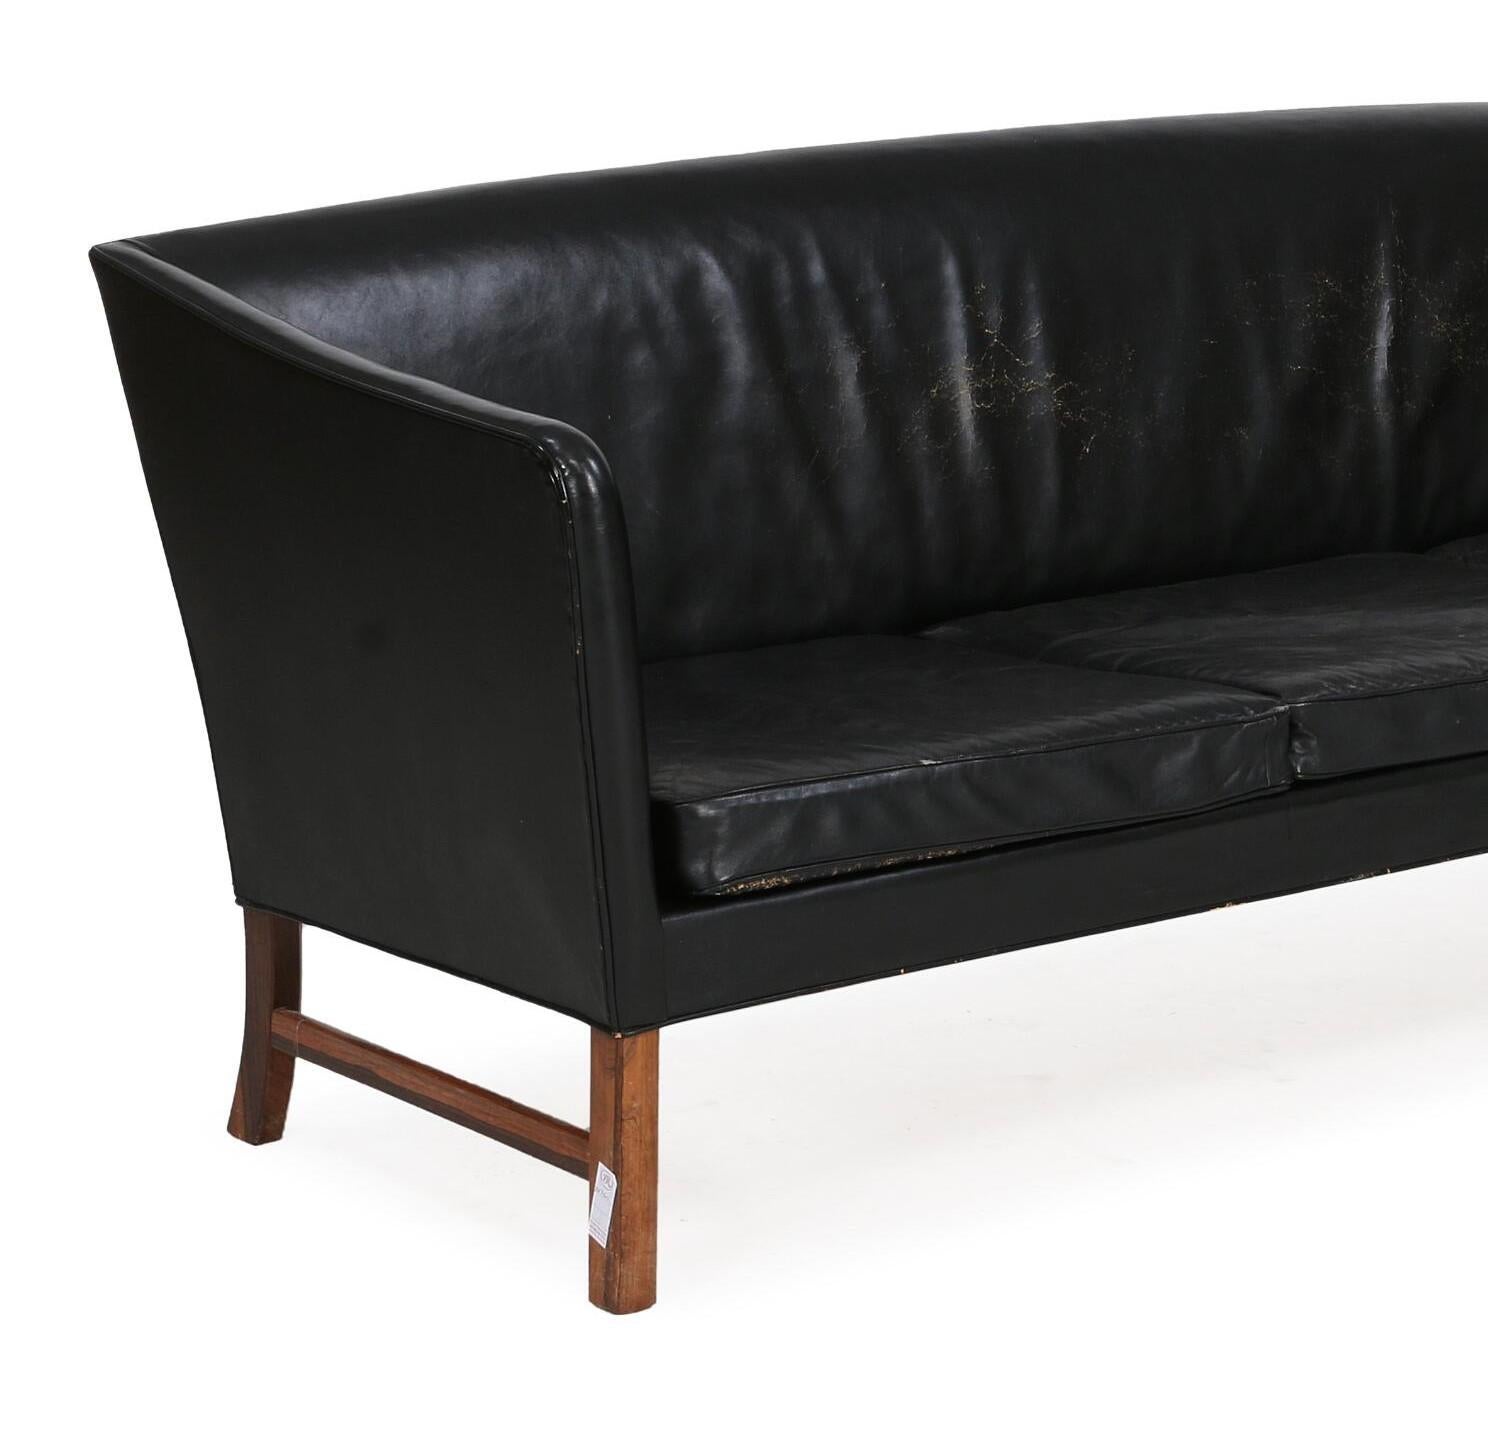 European Ole Wanscher Black Leather Sofa with Rosewood Frame For Sale